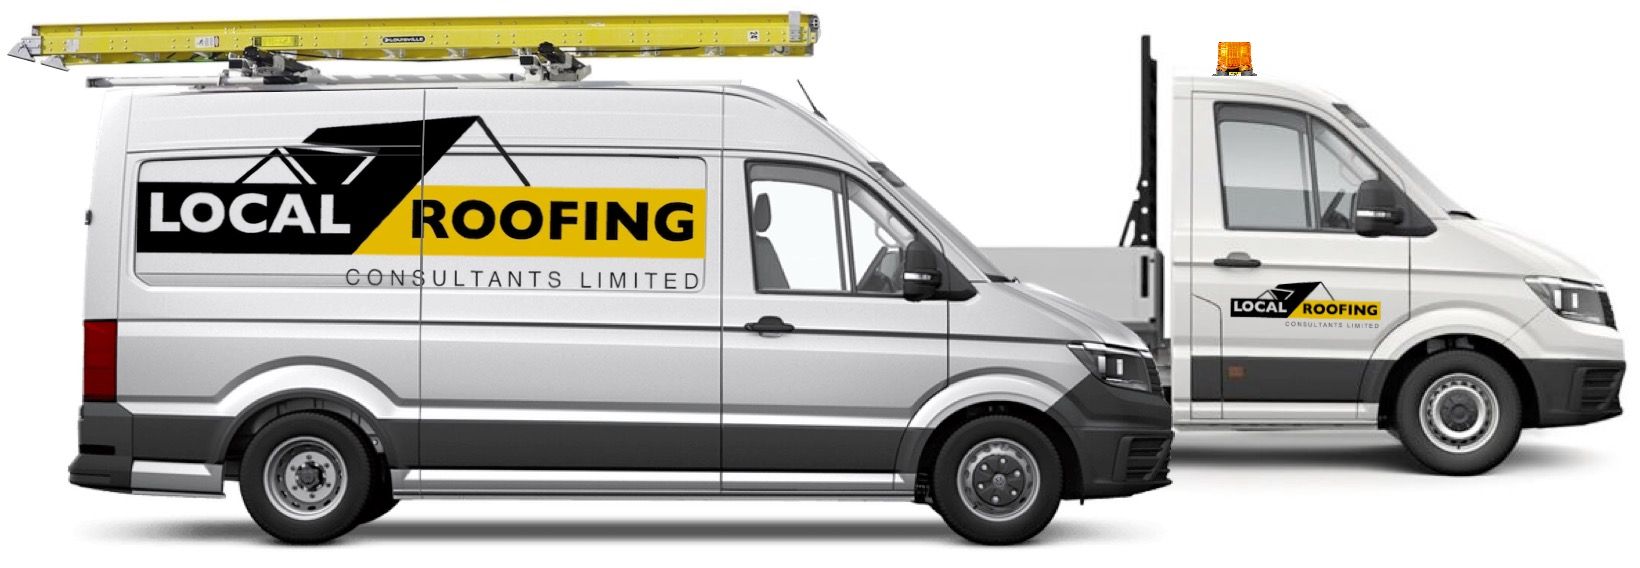 Local Roofing Consultants Limited work in Reading and throughout Berkshire